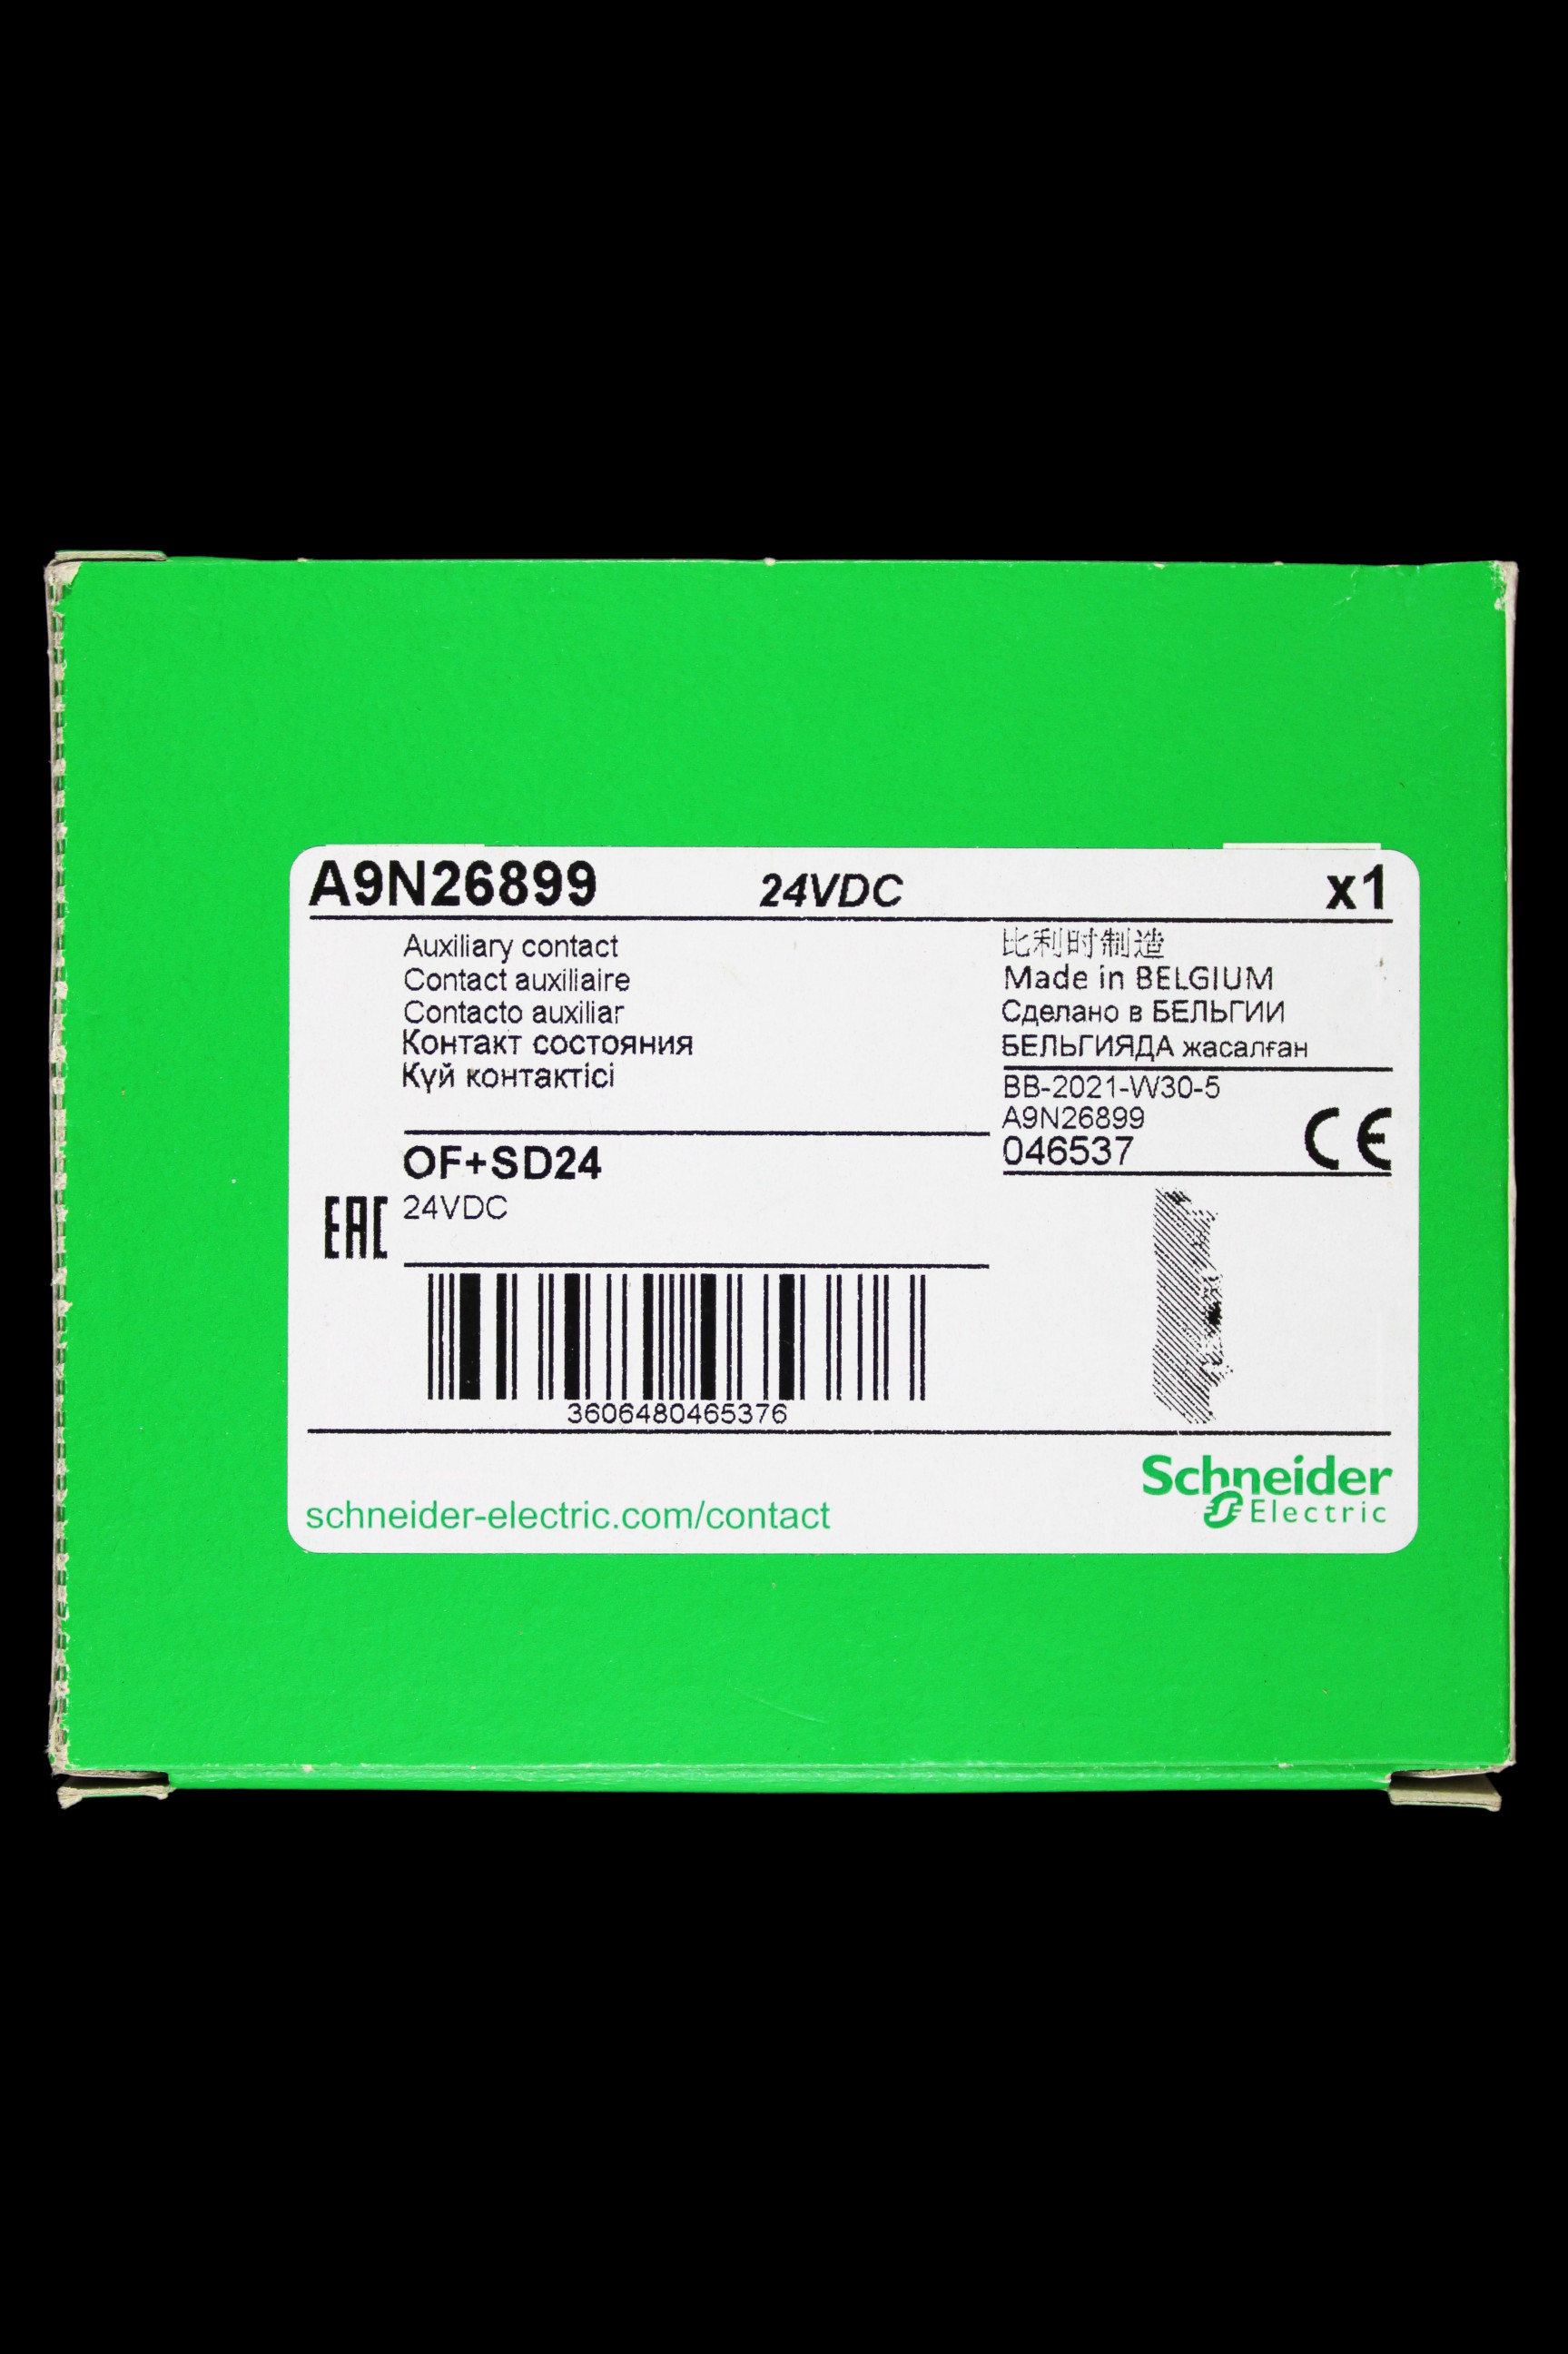 SCHNEIDER 24VDC AUXILIARY CONTACT OF+SD24 A9N26899